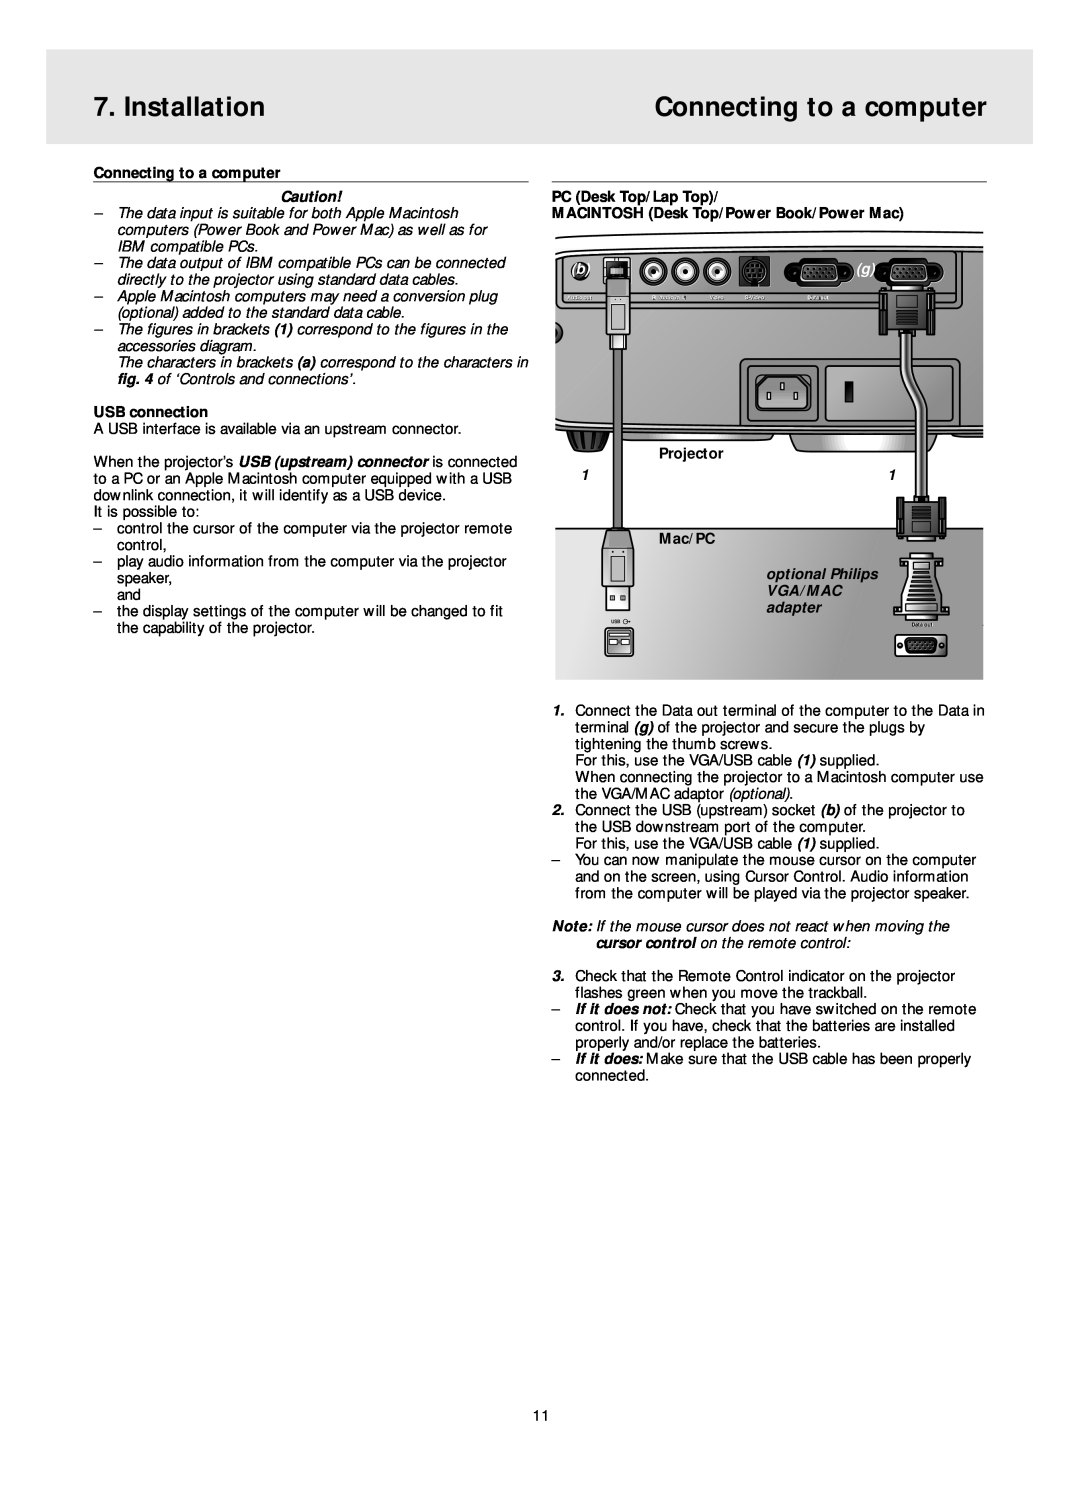 Philips LC4341 manual Connecting to a computer, Installation, USB connection, Projector, Mac/PC, optional Philips, Vga/Mac 